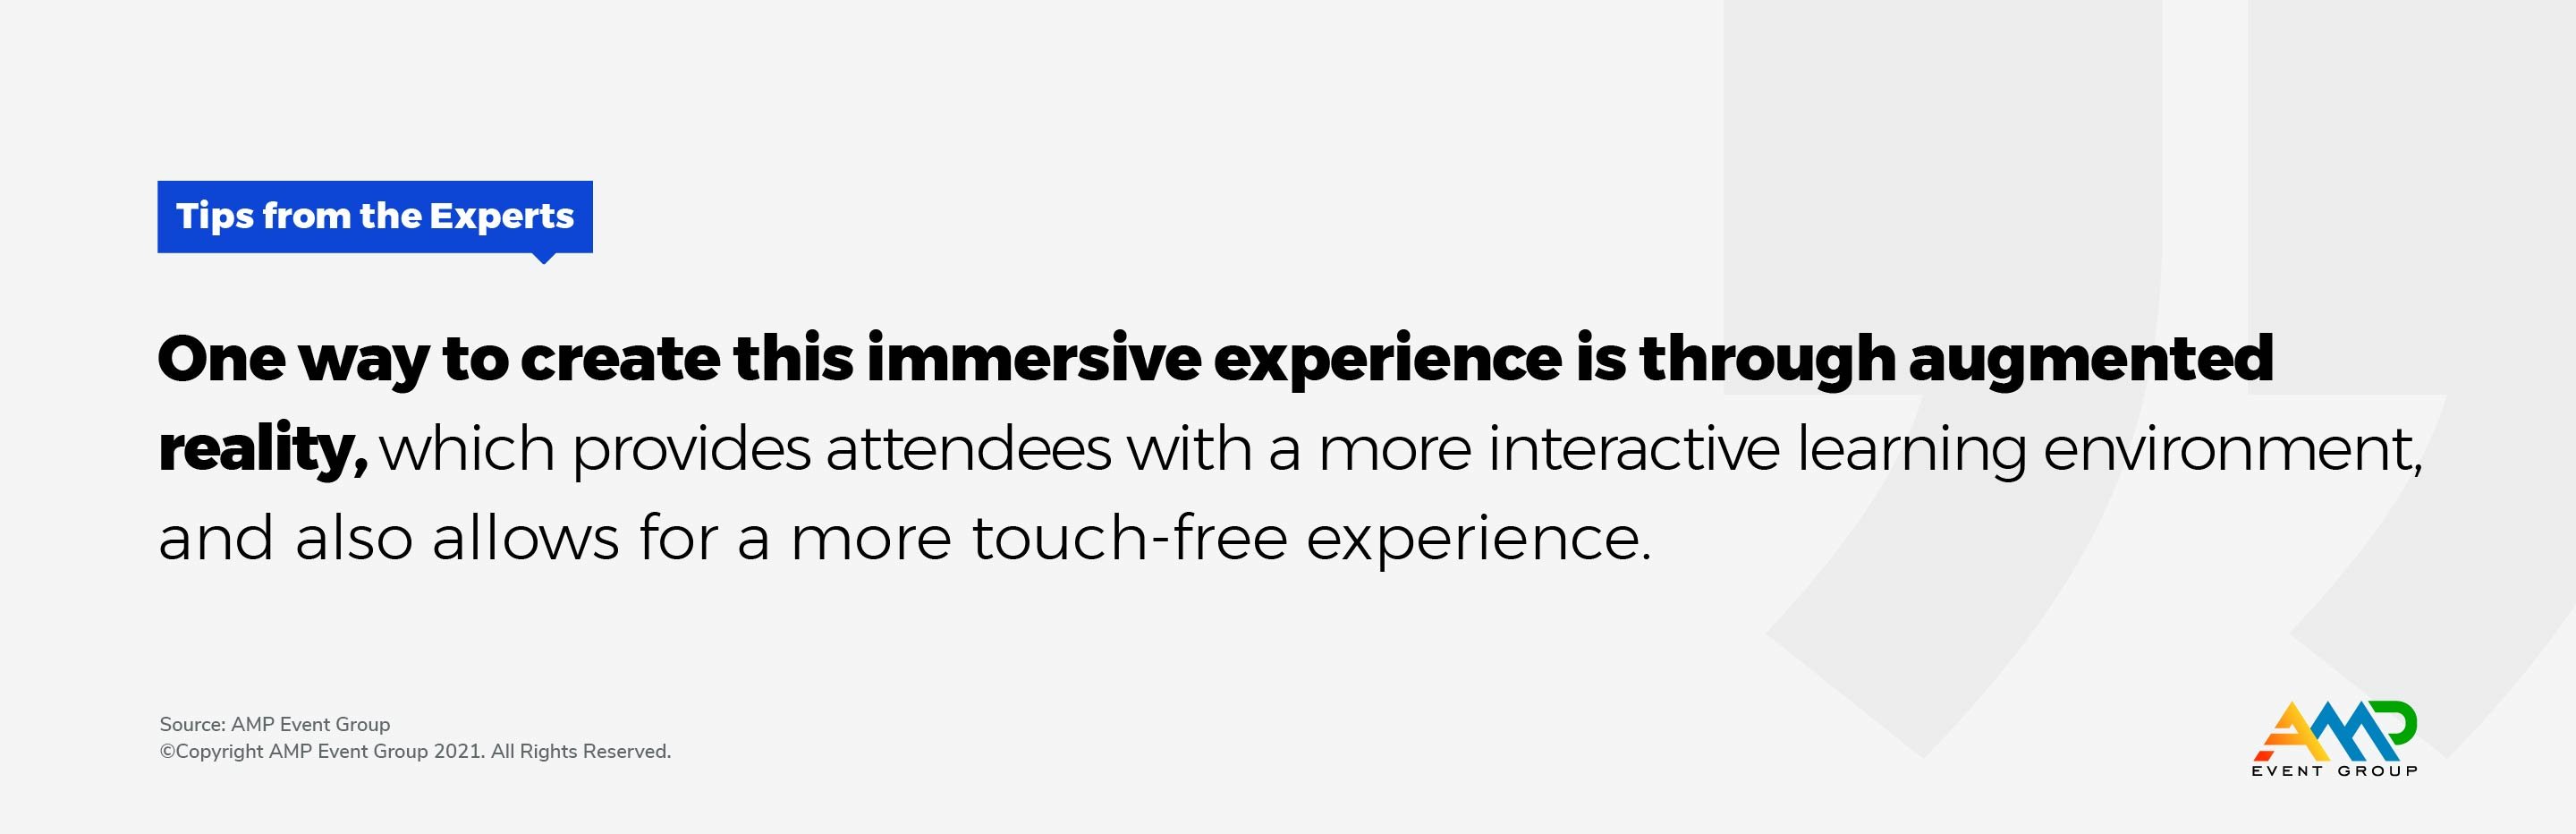 One way to create this immersive experience is through augmented reality, which provides attendees with a more interactive learning environment, and also allows for a more touch-free experience. 